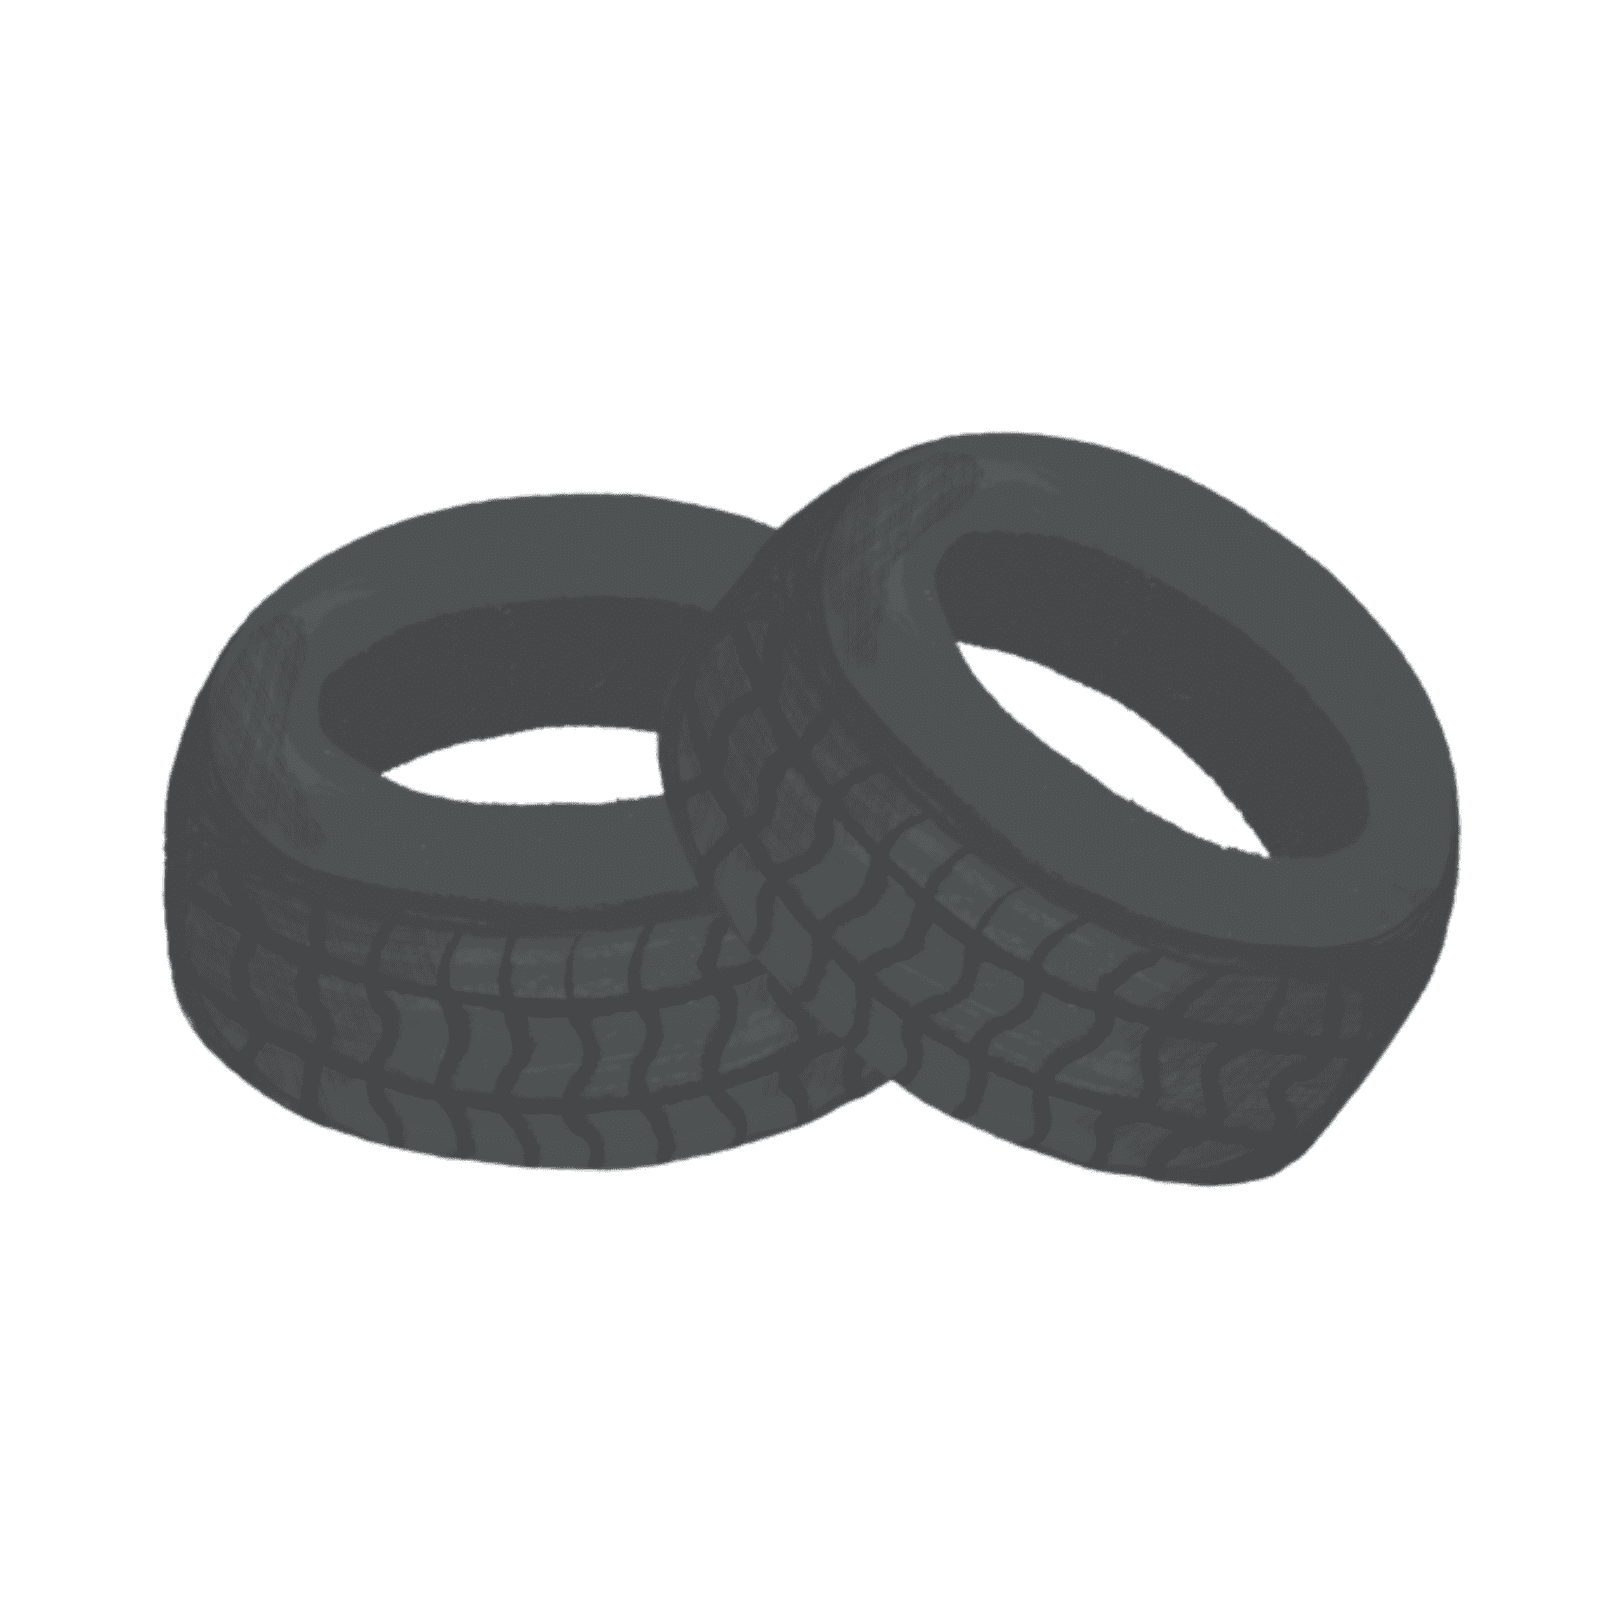 Clean up Used Tires